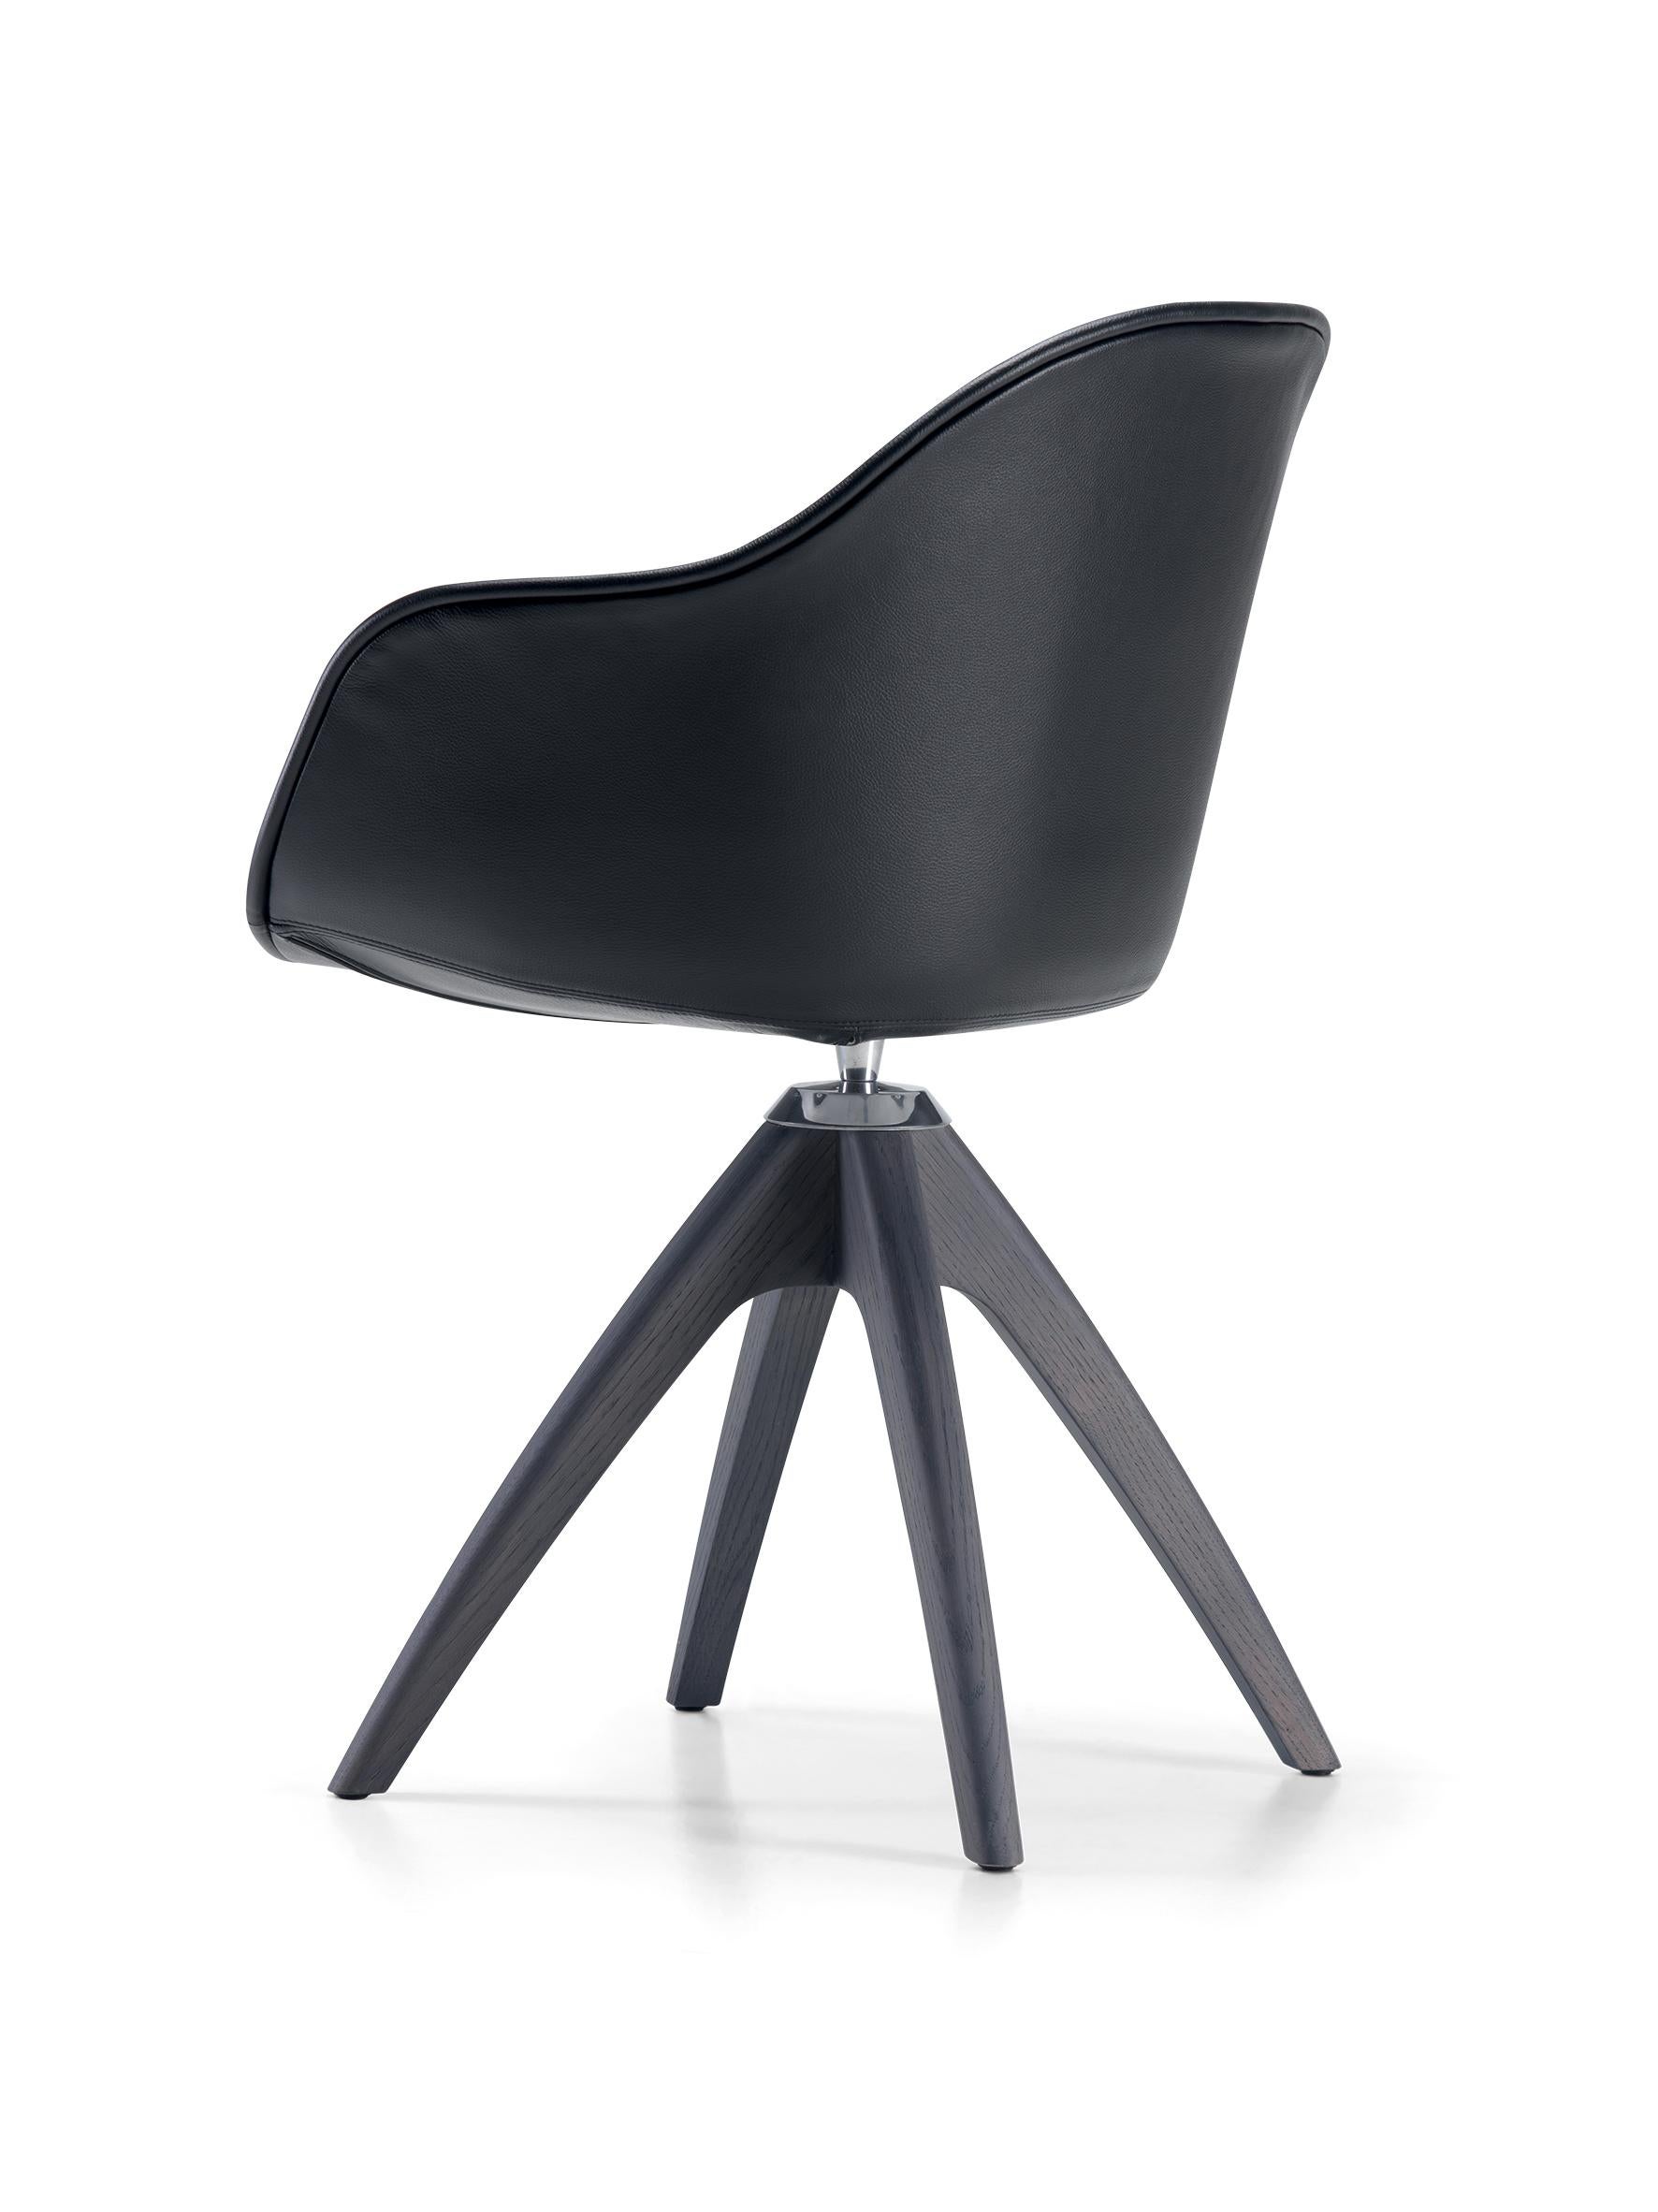 Alias 07F New Lady Soft Wood Chair in Black Leather Seat and Ash Grey Oak Frame by Paolo Rizzatto

Small armchair with 4 star base in solid oak wood. Shell in polyurethane covered with fabric or leather (cover is not removable). NOTE: it is